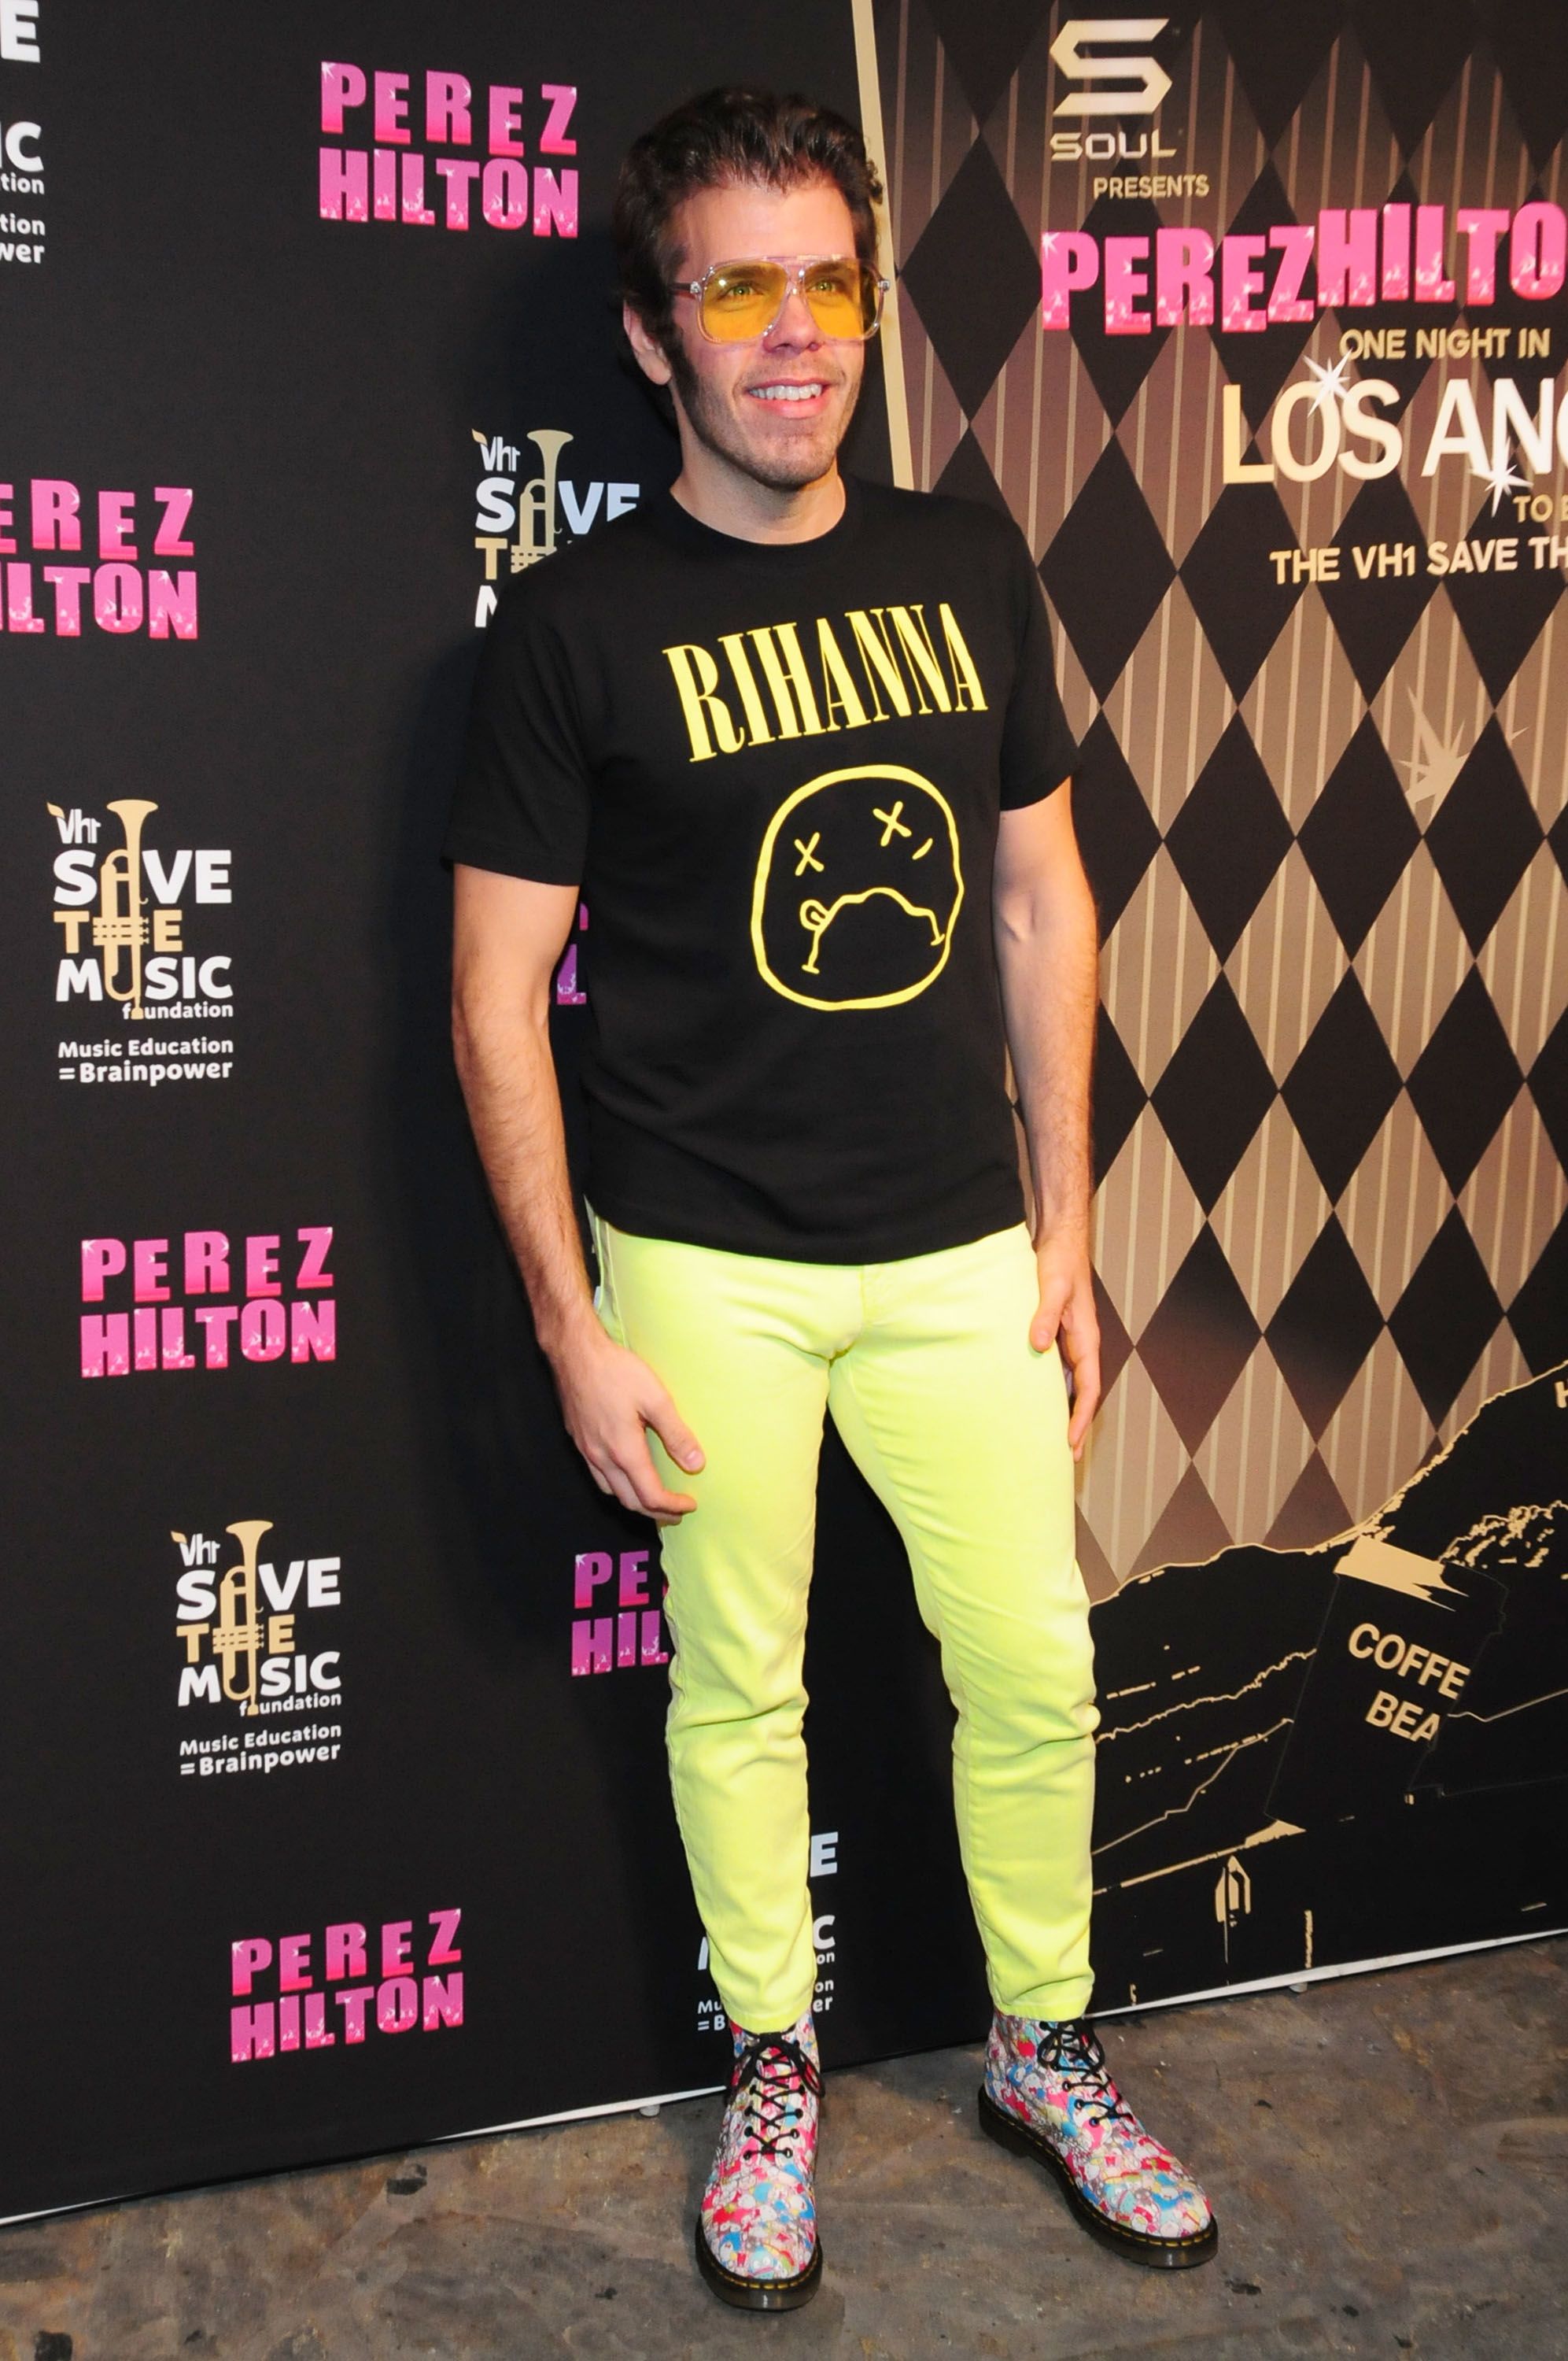 Perez Hilton on X: Would you wear these extreme cut out jeans? VOTE HERE!    / X